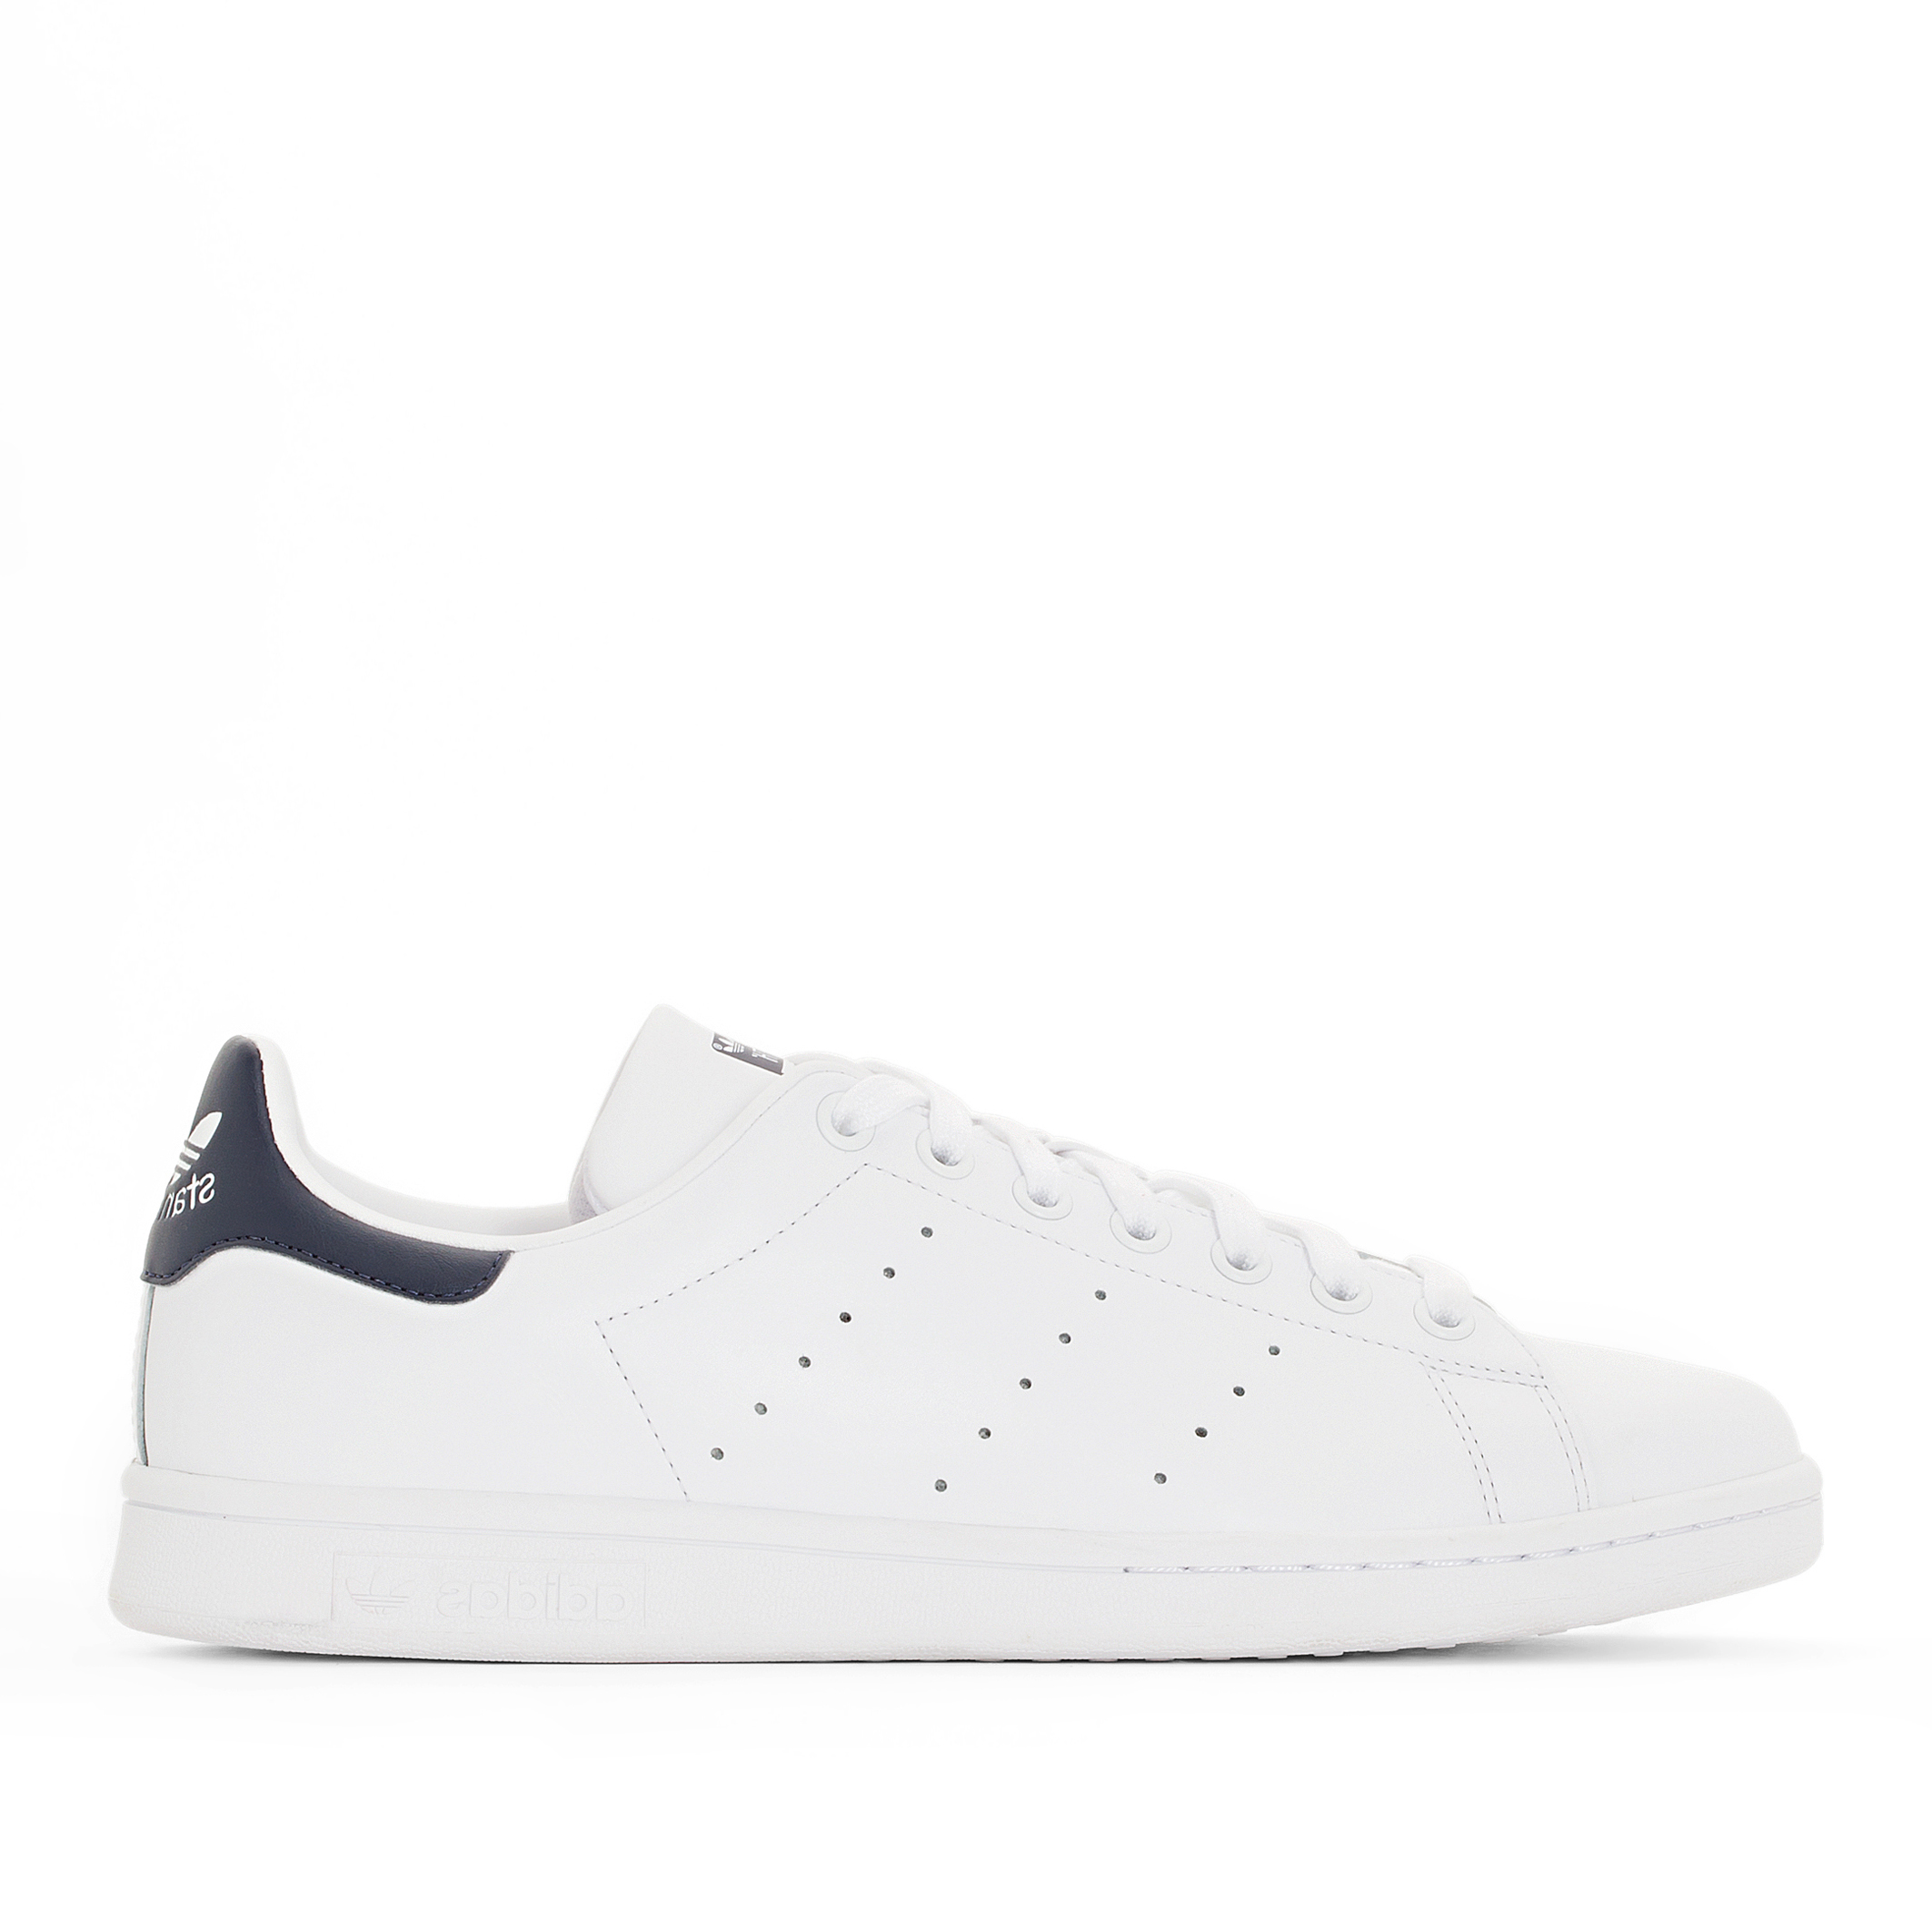 Stan smith leather trainers , white/navy, Adidas Originals | La Redoute